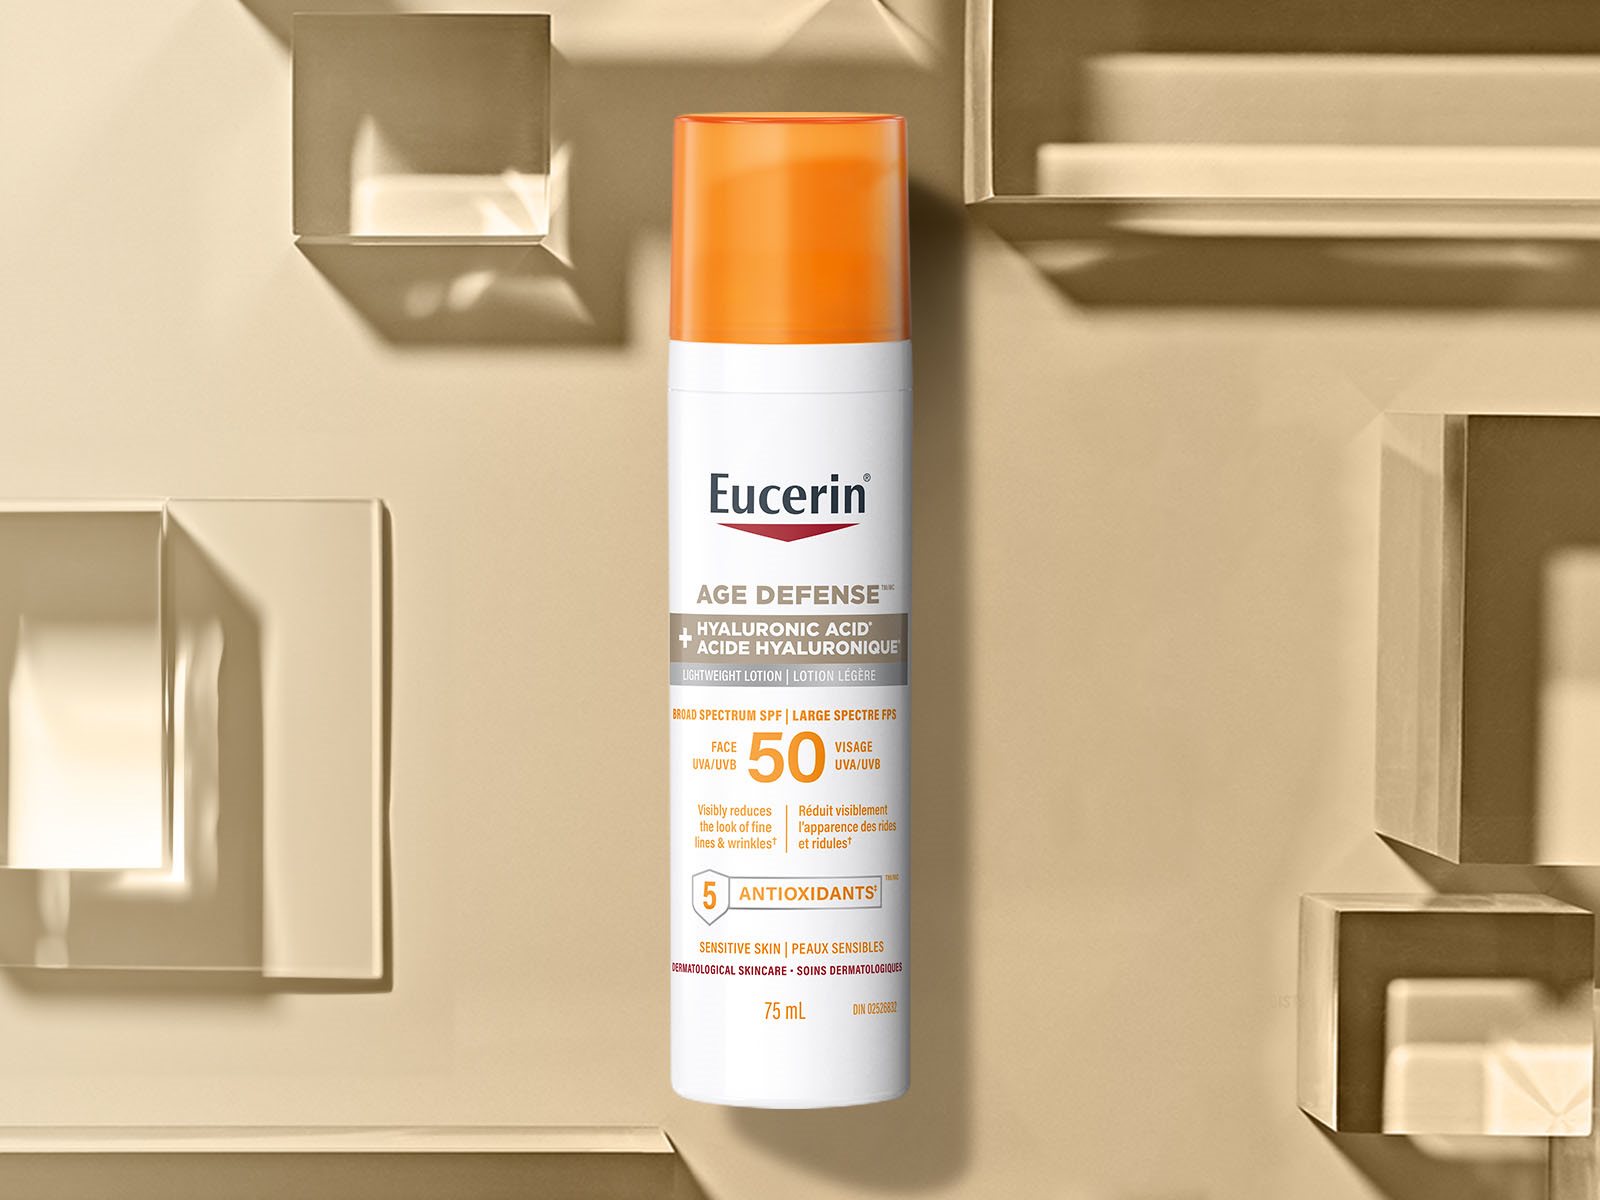 A view of a Eucerin Age Defense SPF 50 Face Sunscreen Lotion product against a beige coloured background.